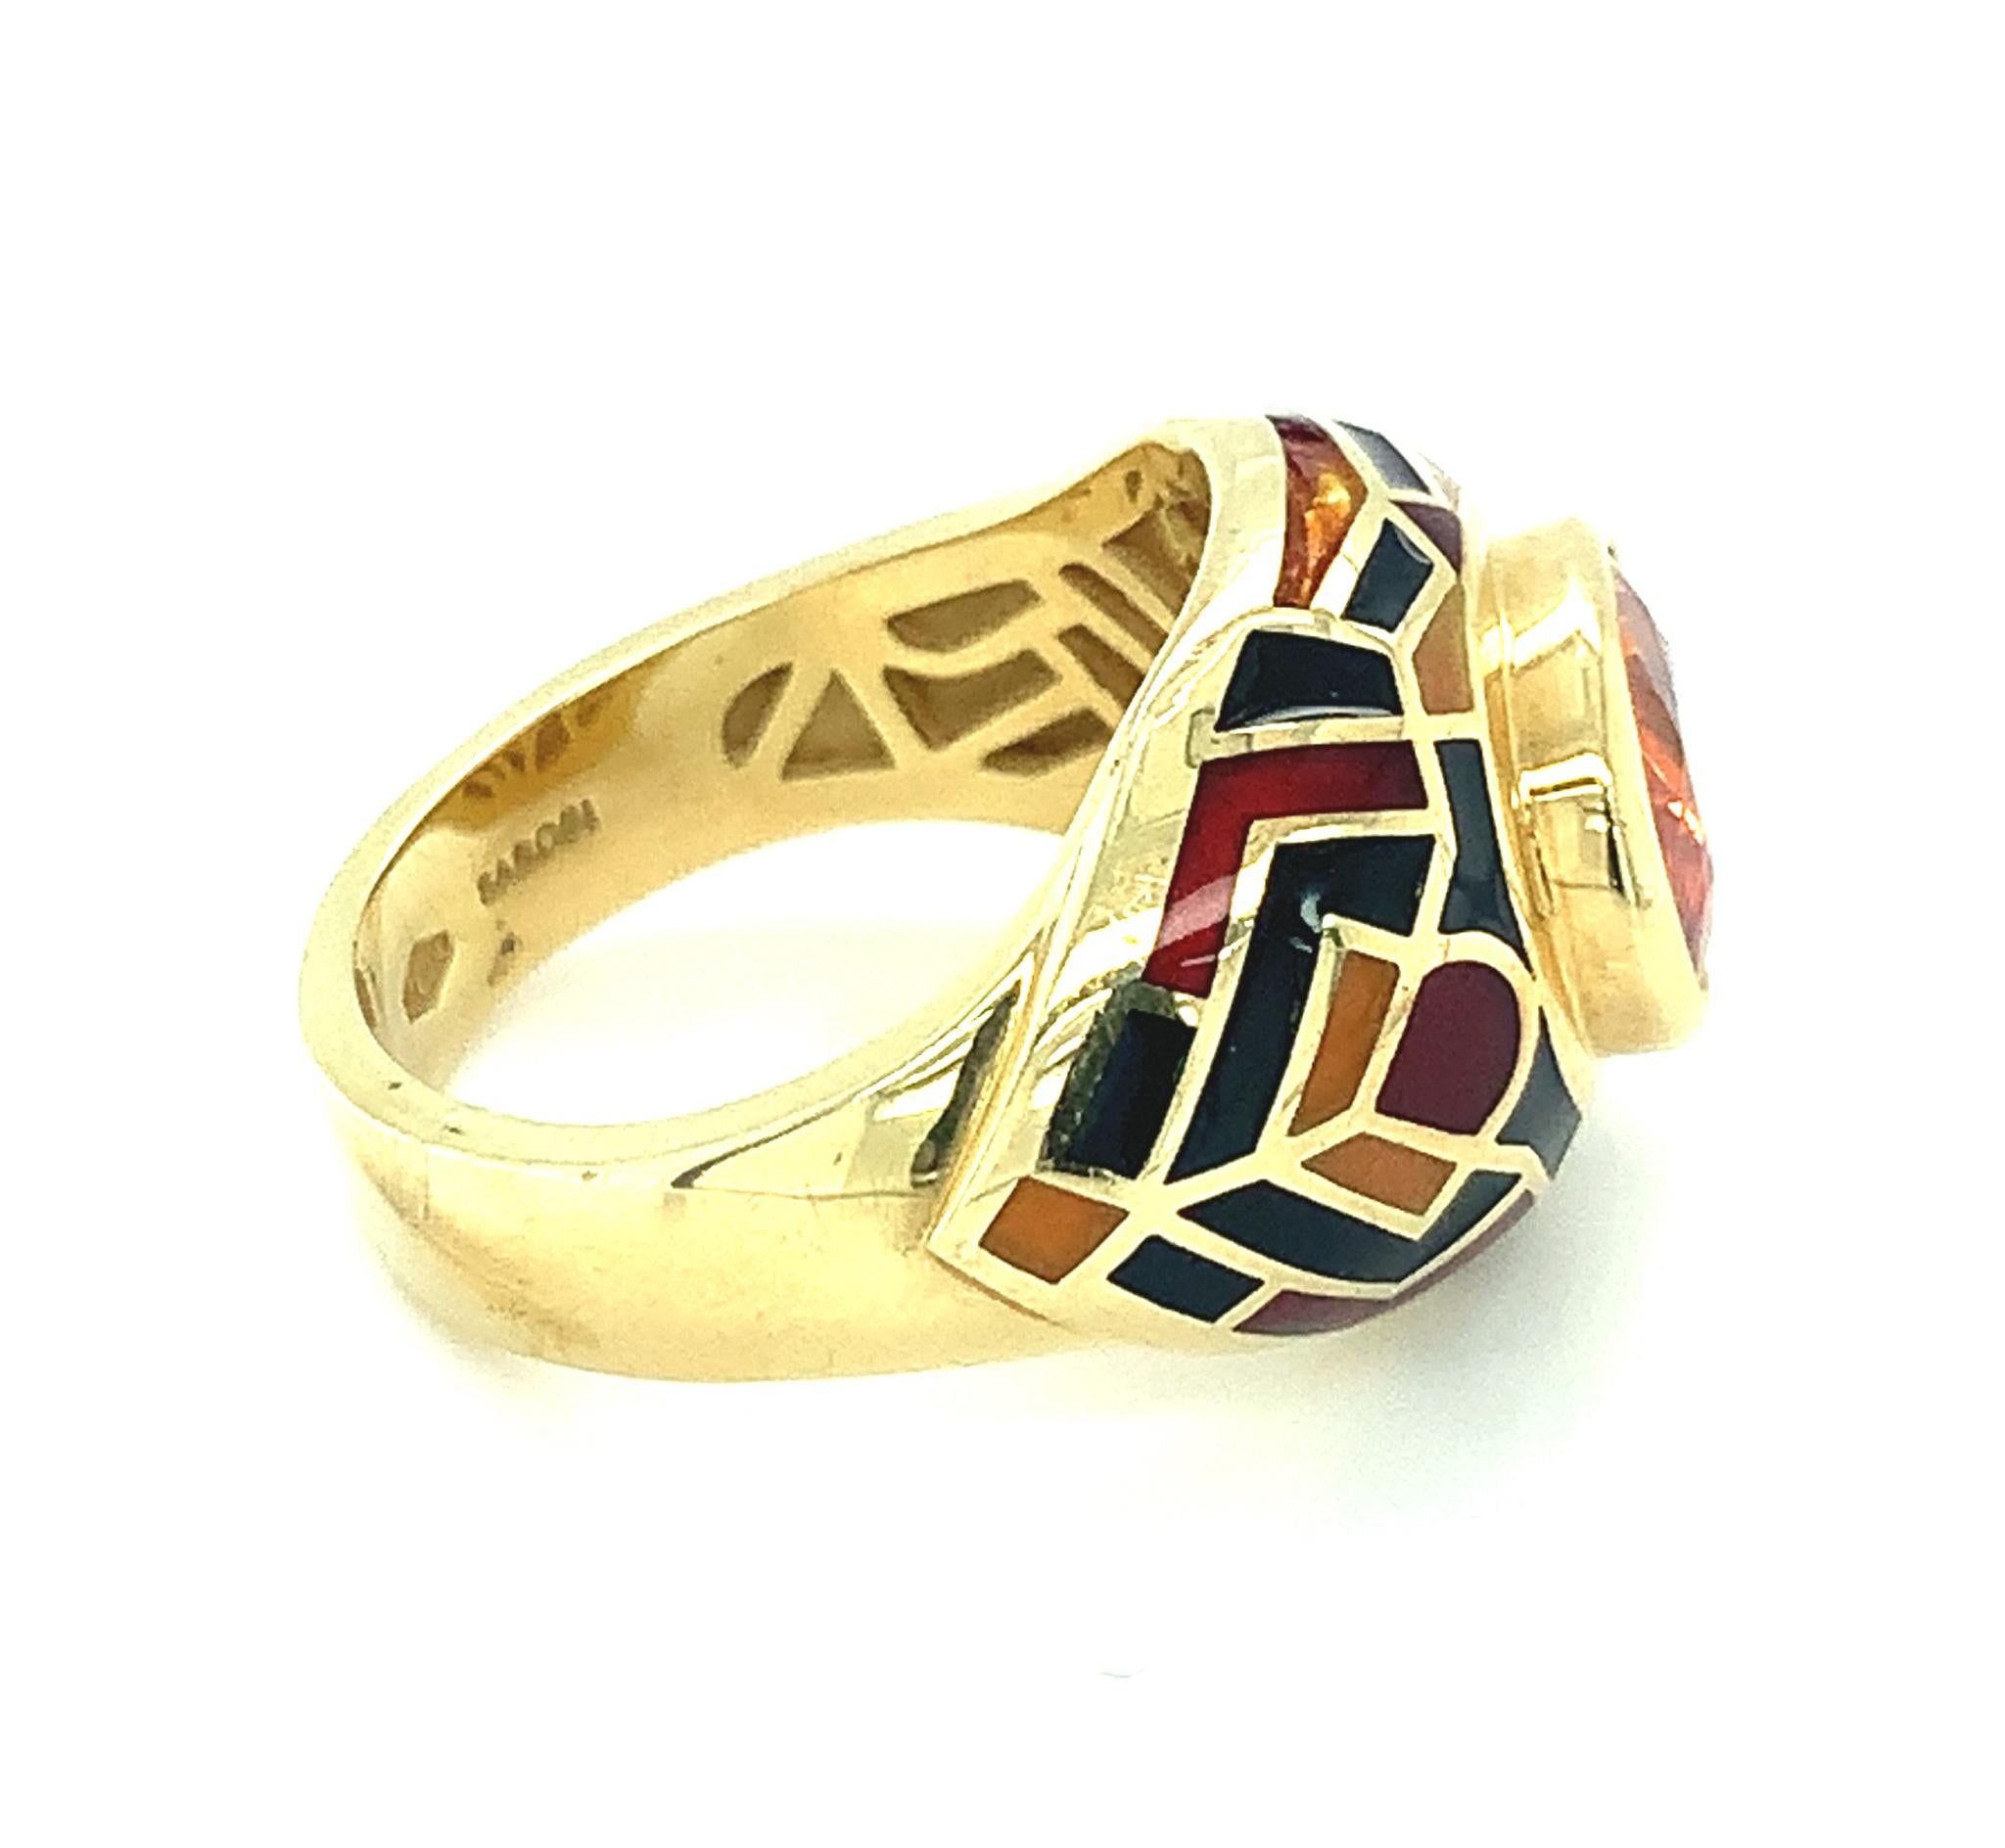 Artisan Spessartite Garnet Ring in Gold with Multi-Colored Vitreous Enamel, 5.72 Carats For Sale